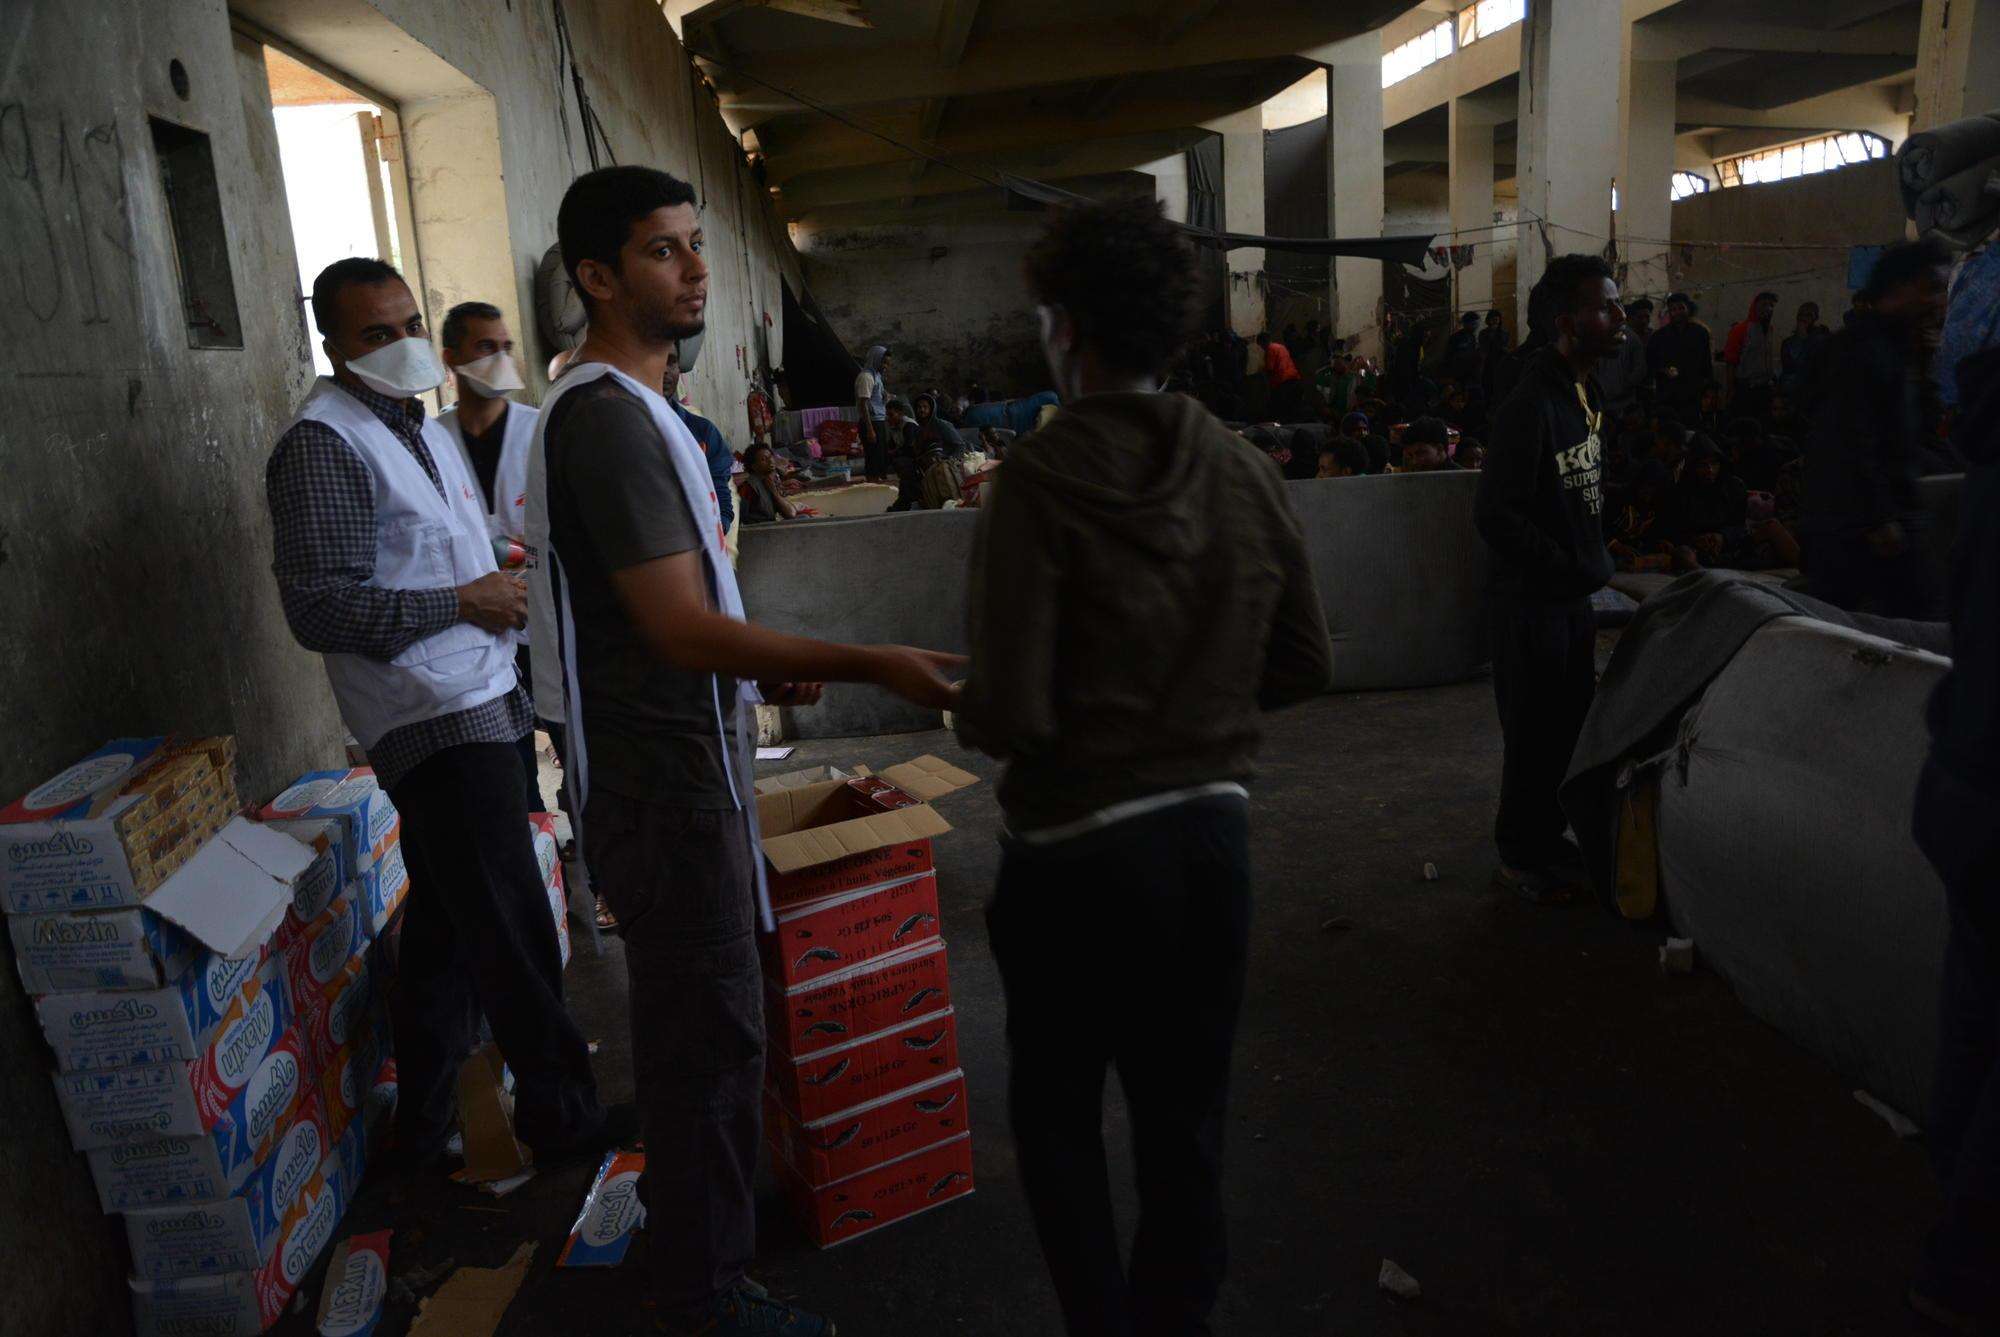 MSF teams conduct a food distribution in a detention center in Libya.